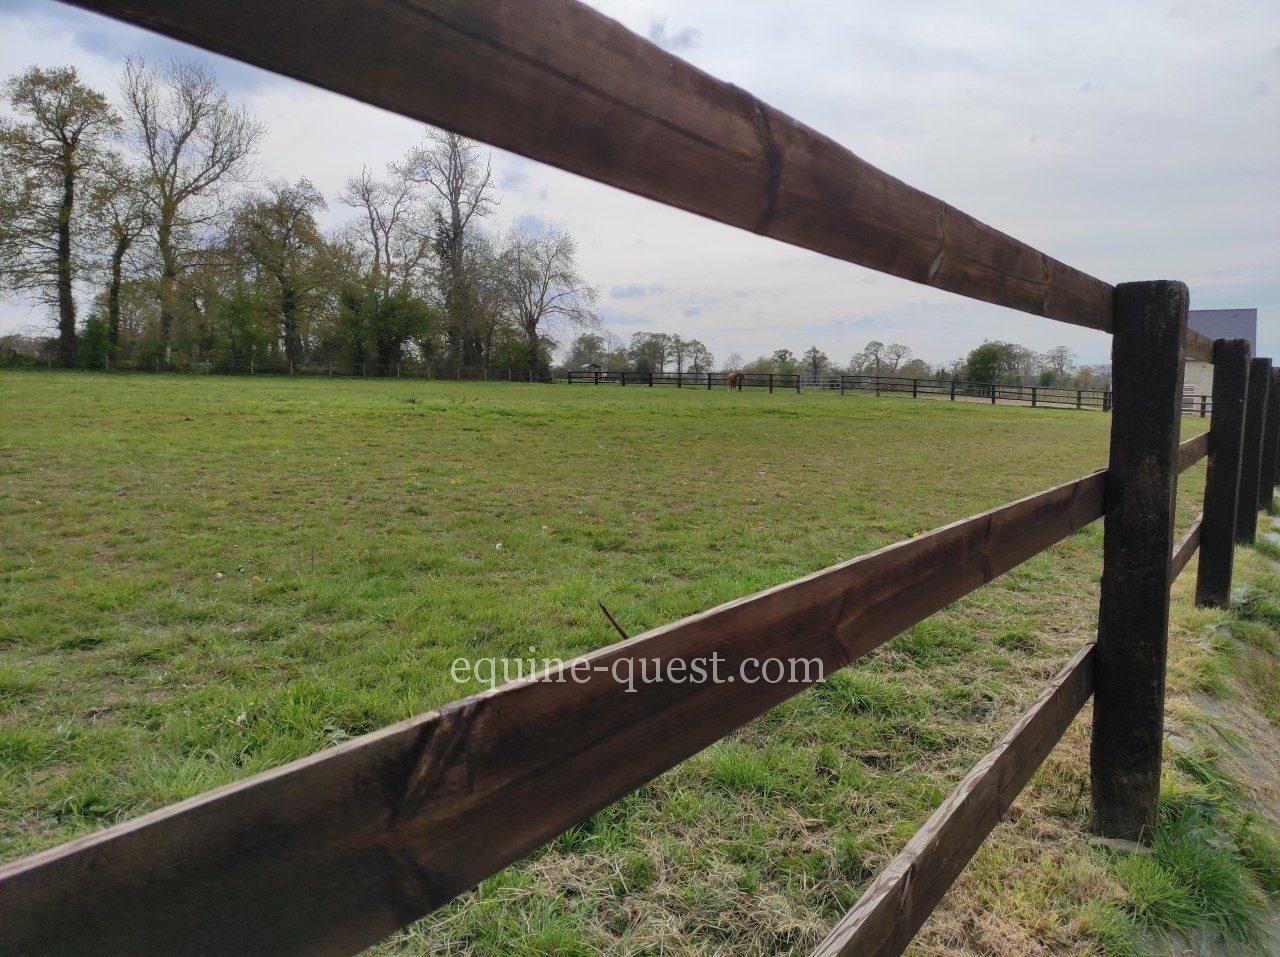 Equestrian property – Bayeux area -16,5 hectares